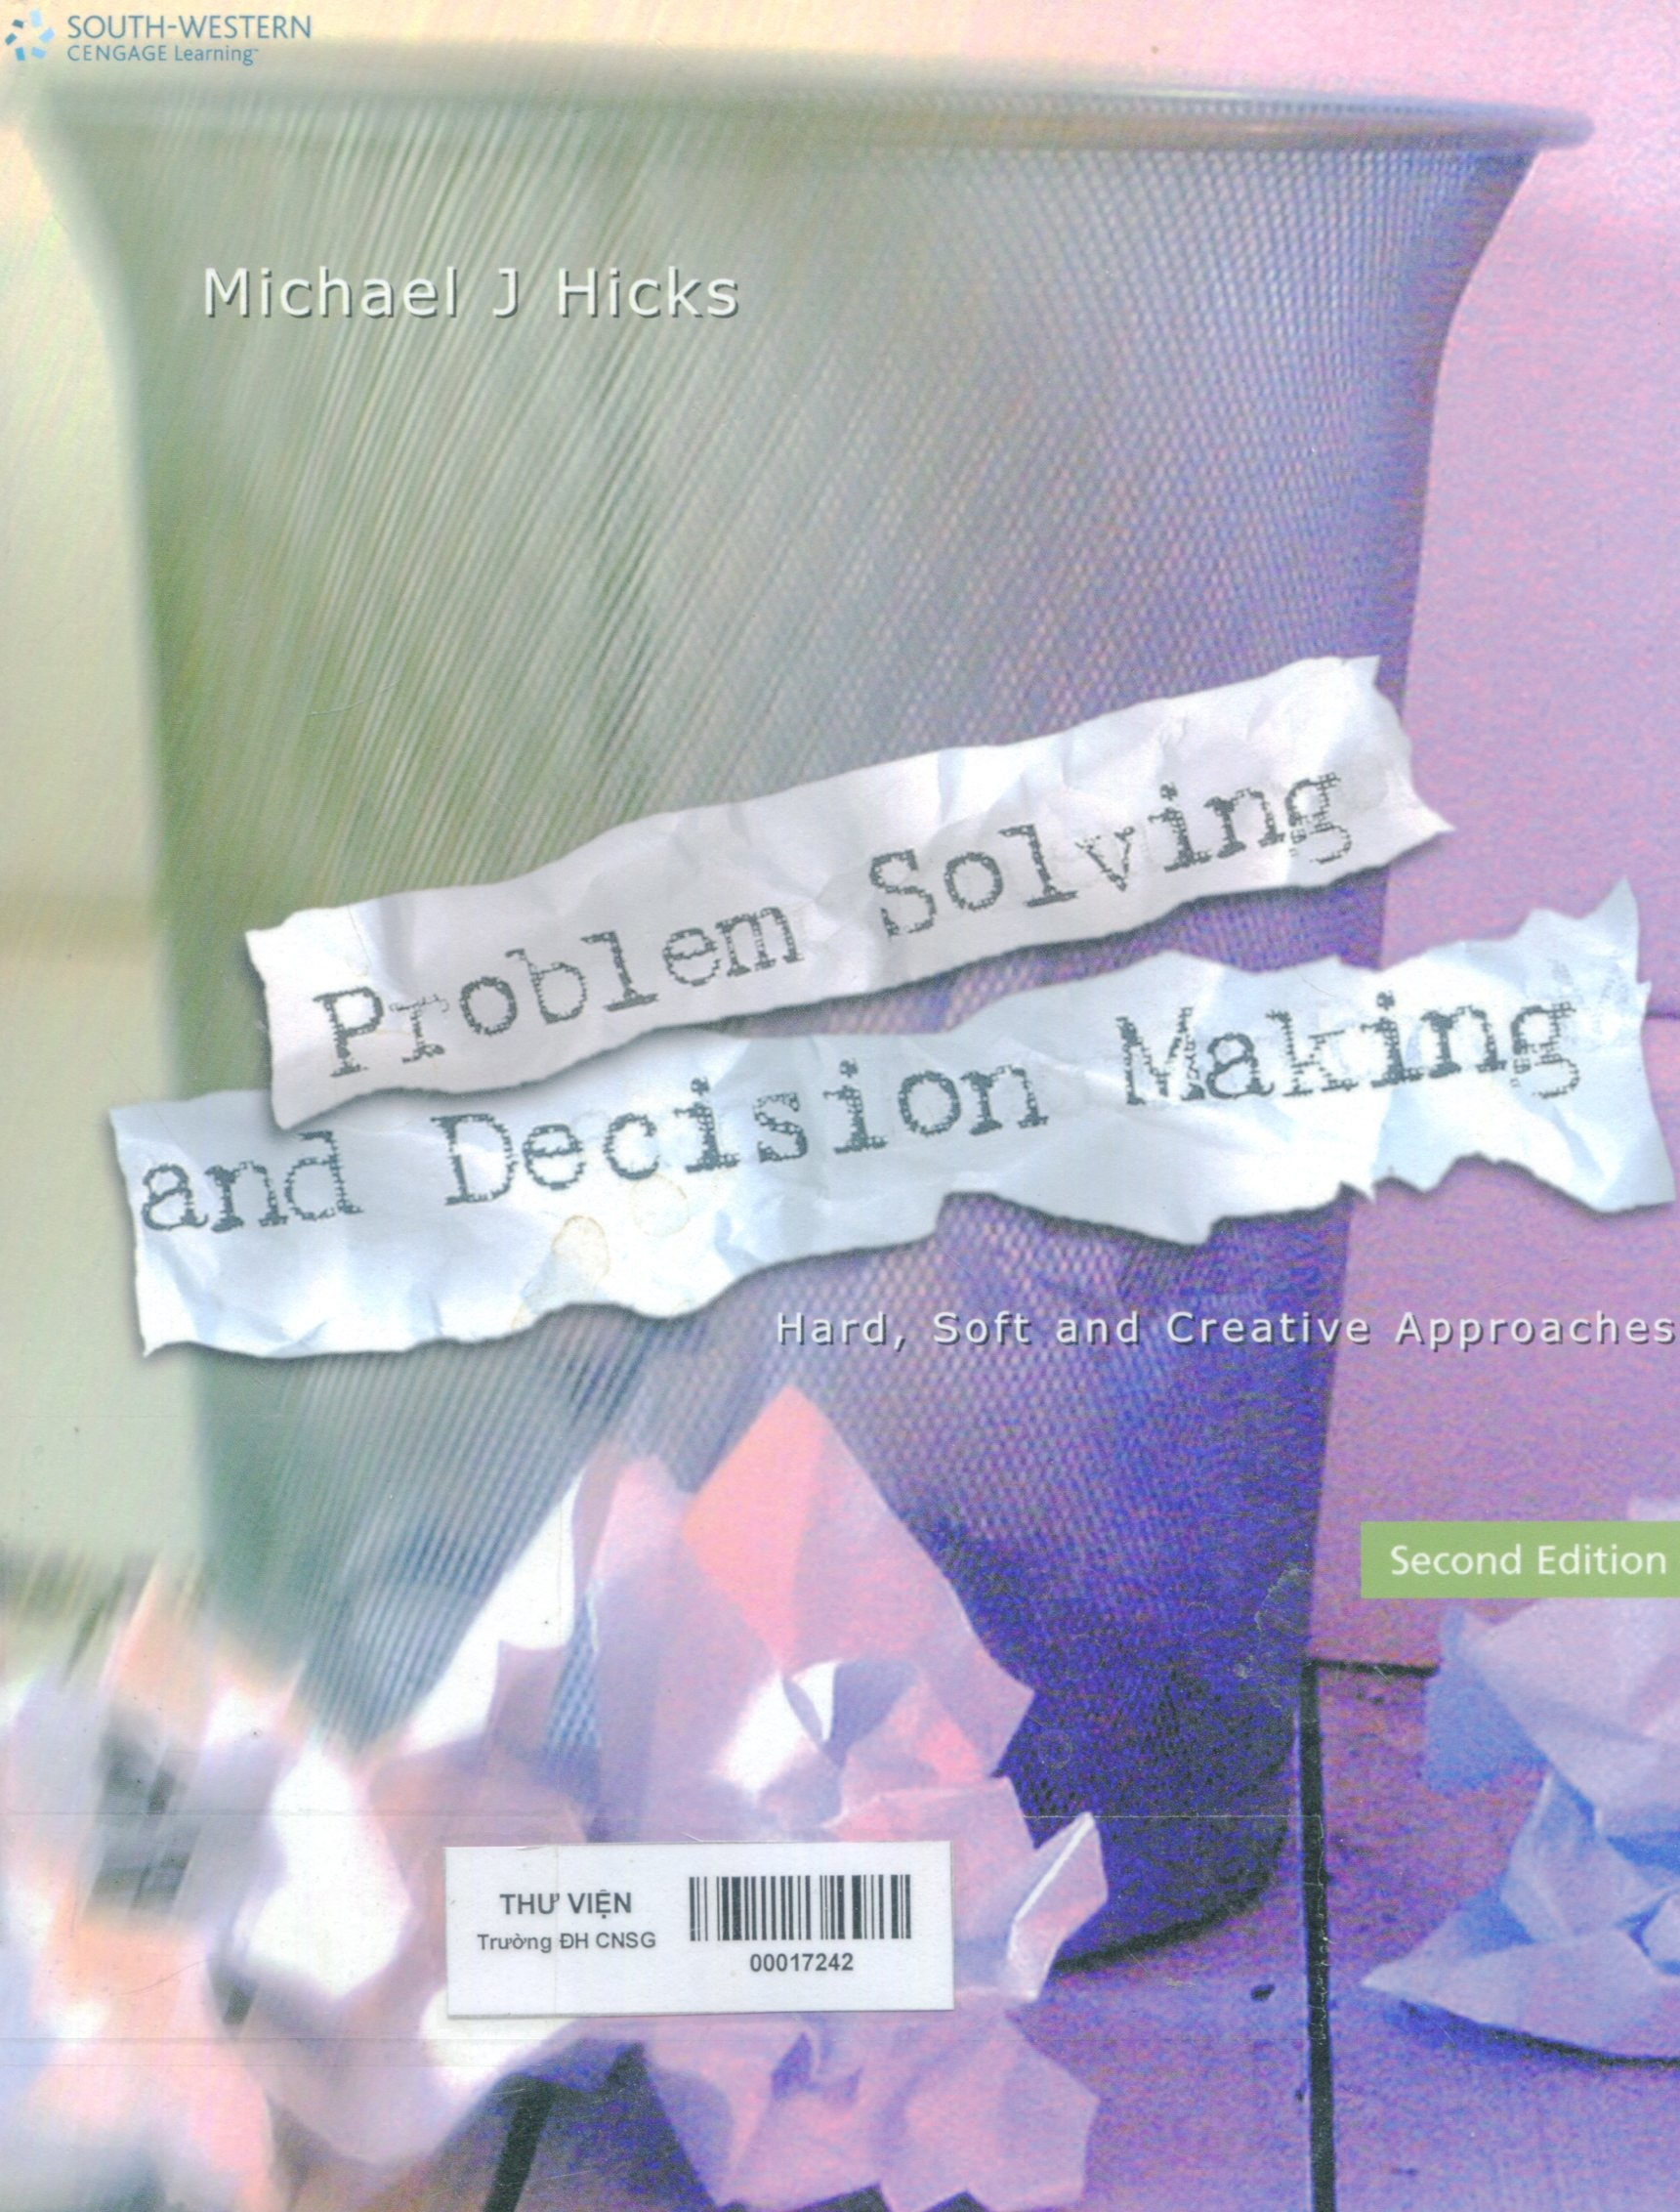 Problem solving and decision making : Hard, soft and creative approaches